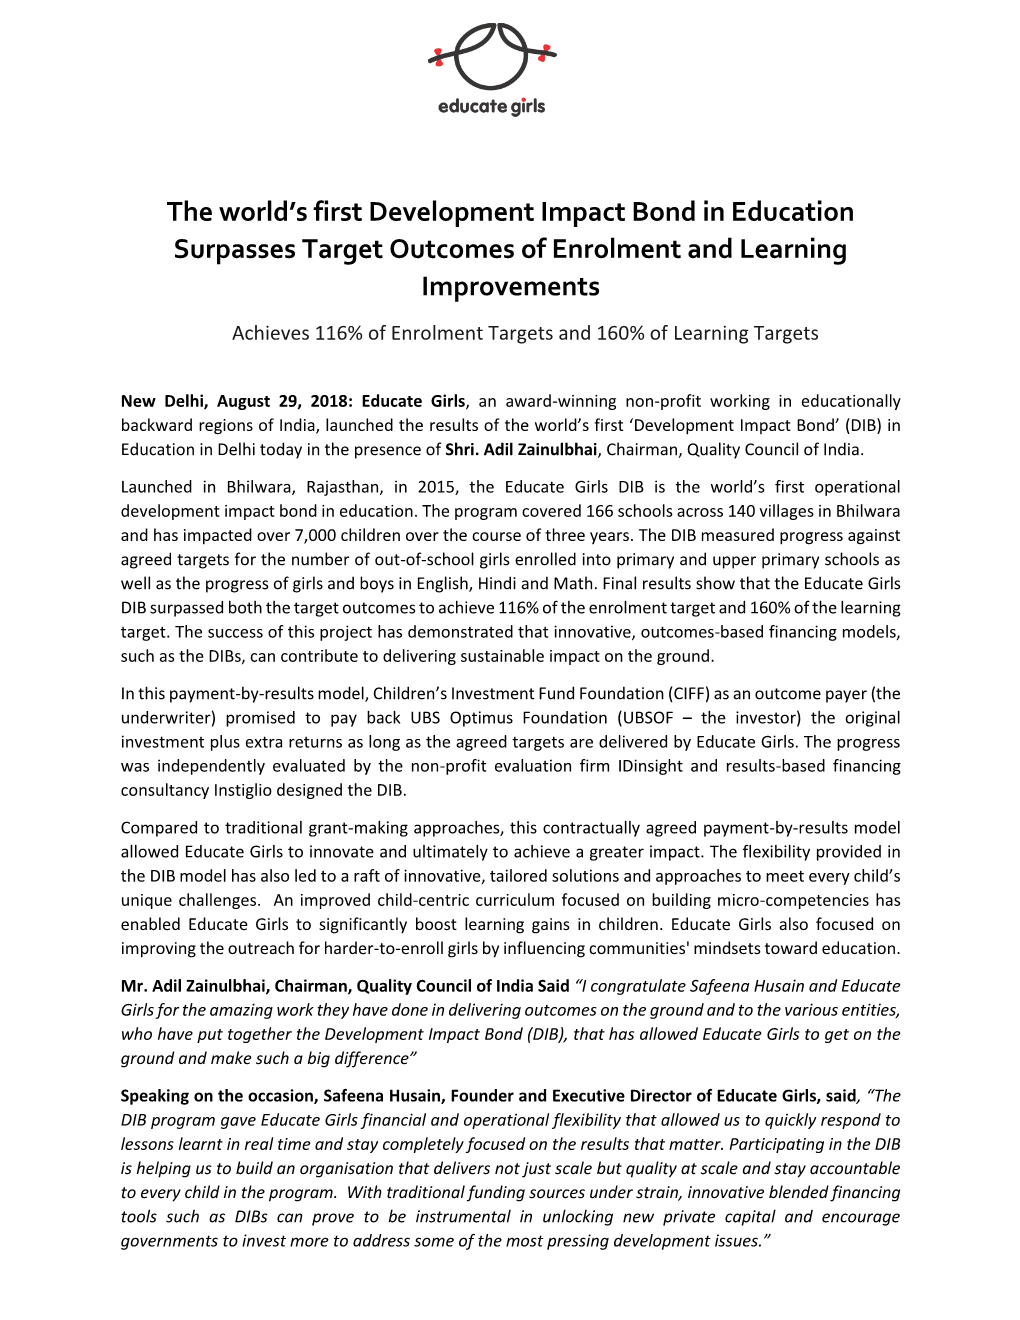 The World's First Development Impact Bond in Education